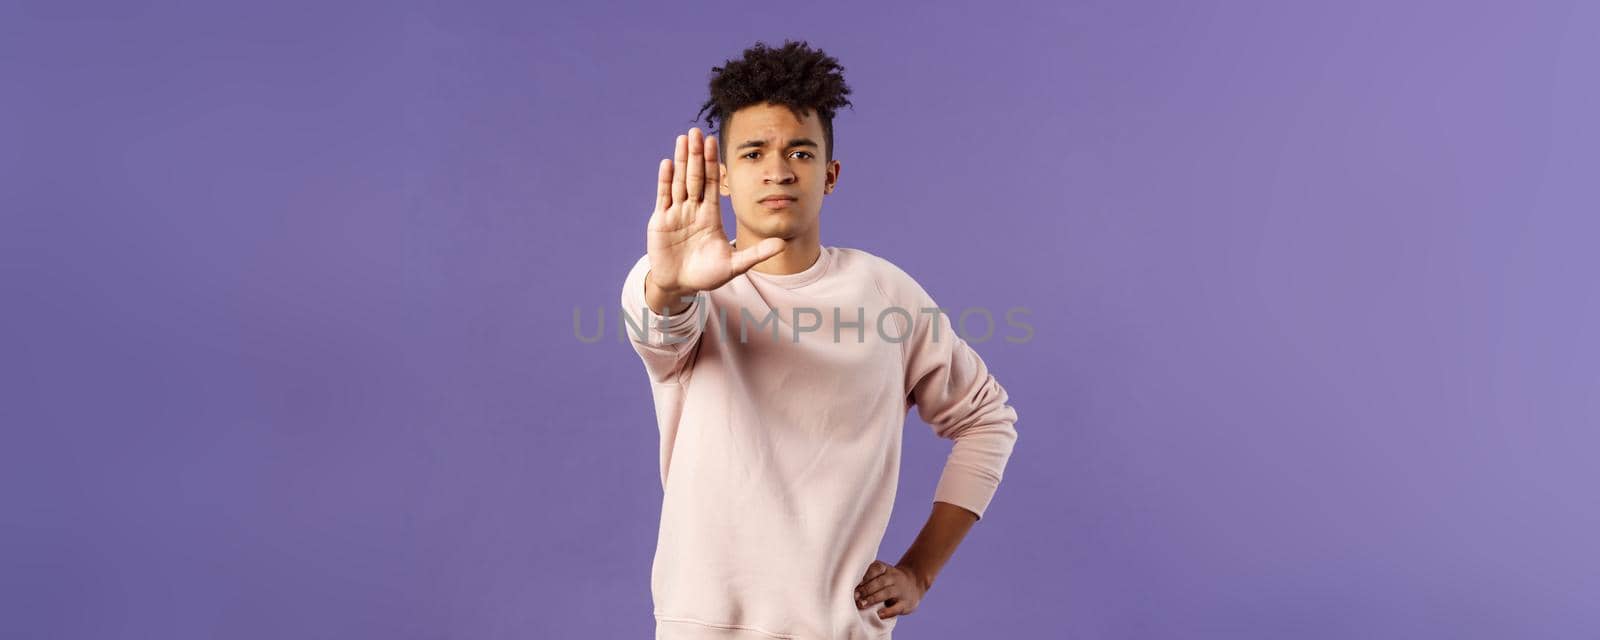 Portrait of confident serious-looking determined young man trying to prevent something, pull hand in stop gesture, look camera assertive, prohibit, give warning or forbid something by Benzoix